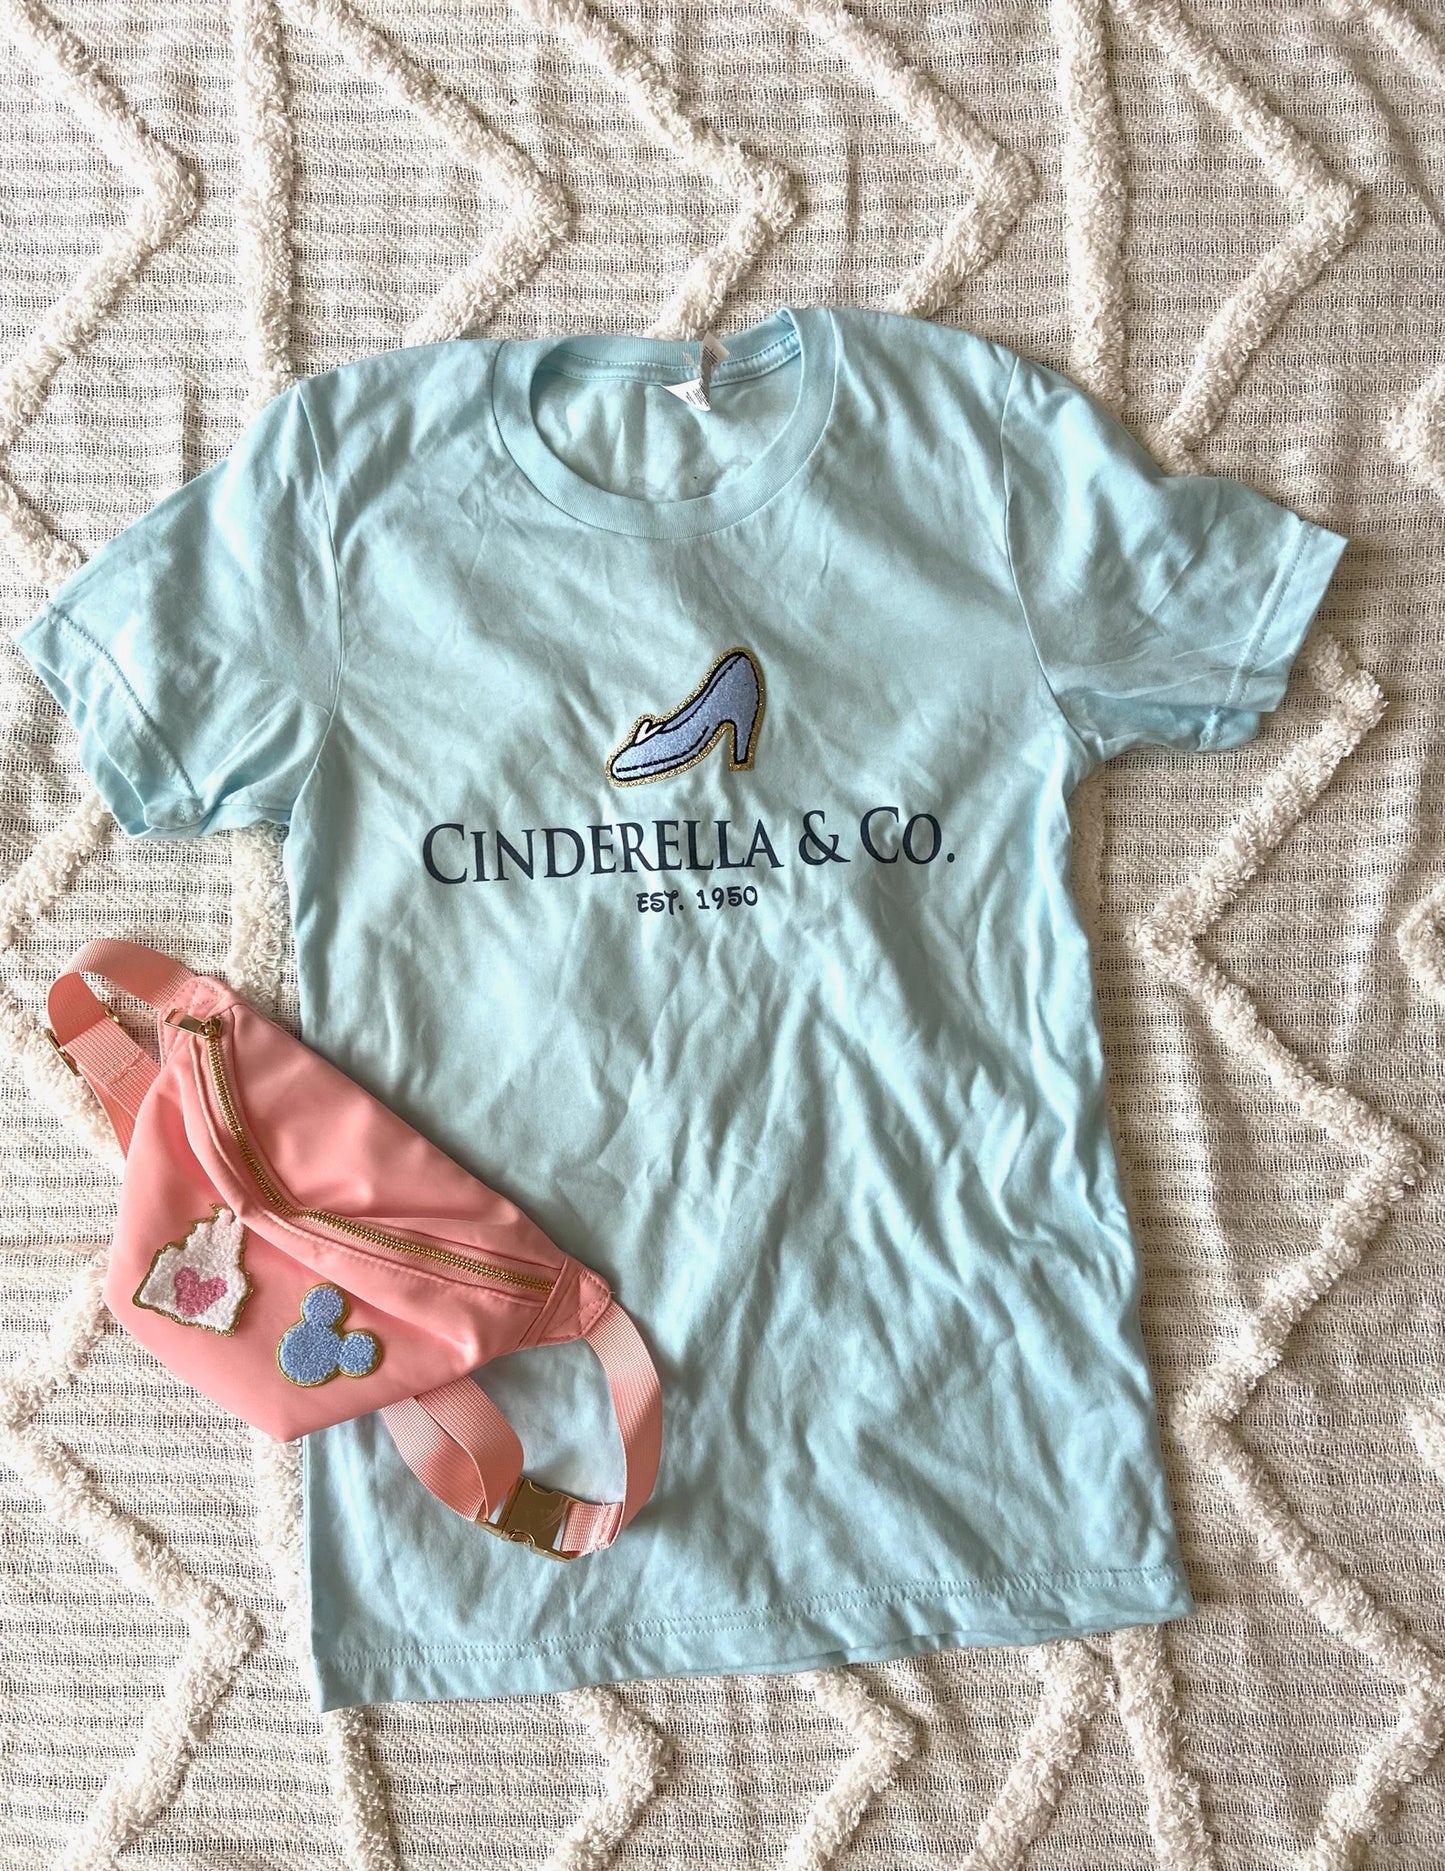 Meet me at Midnight glass slipper chenille patch tee